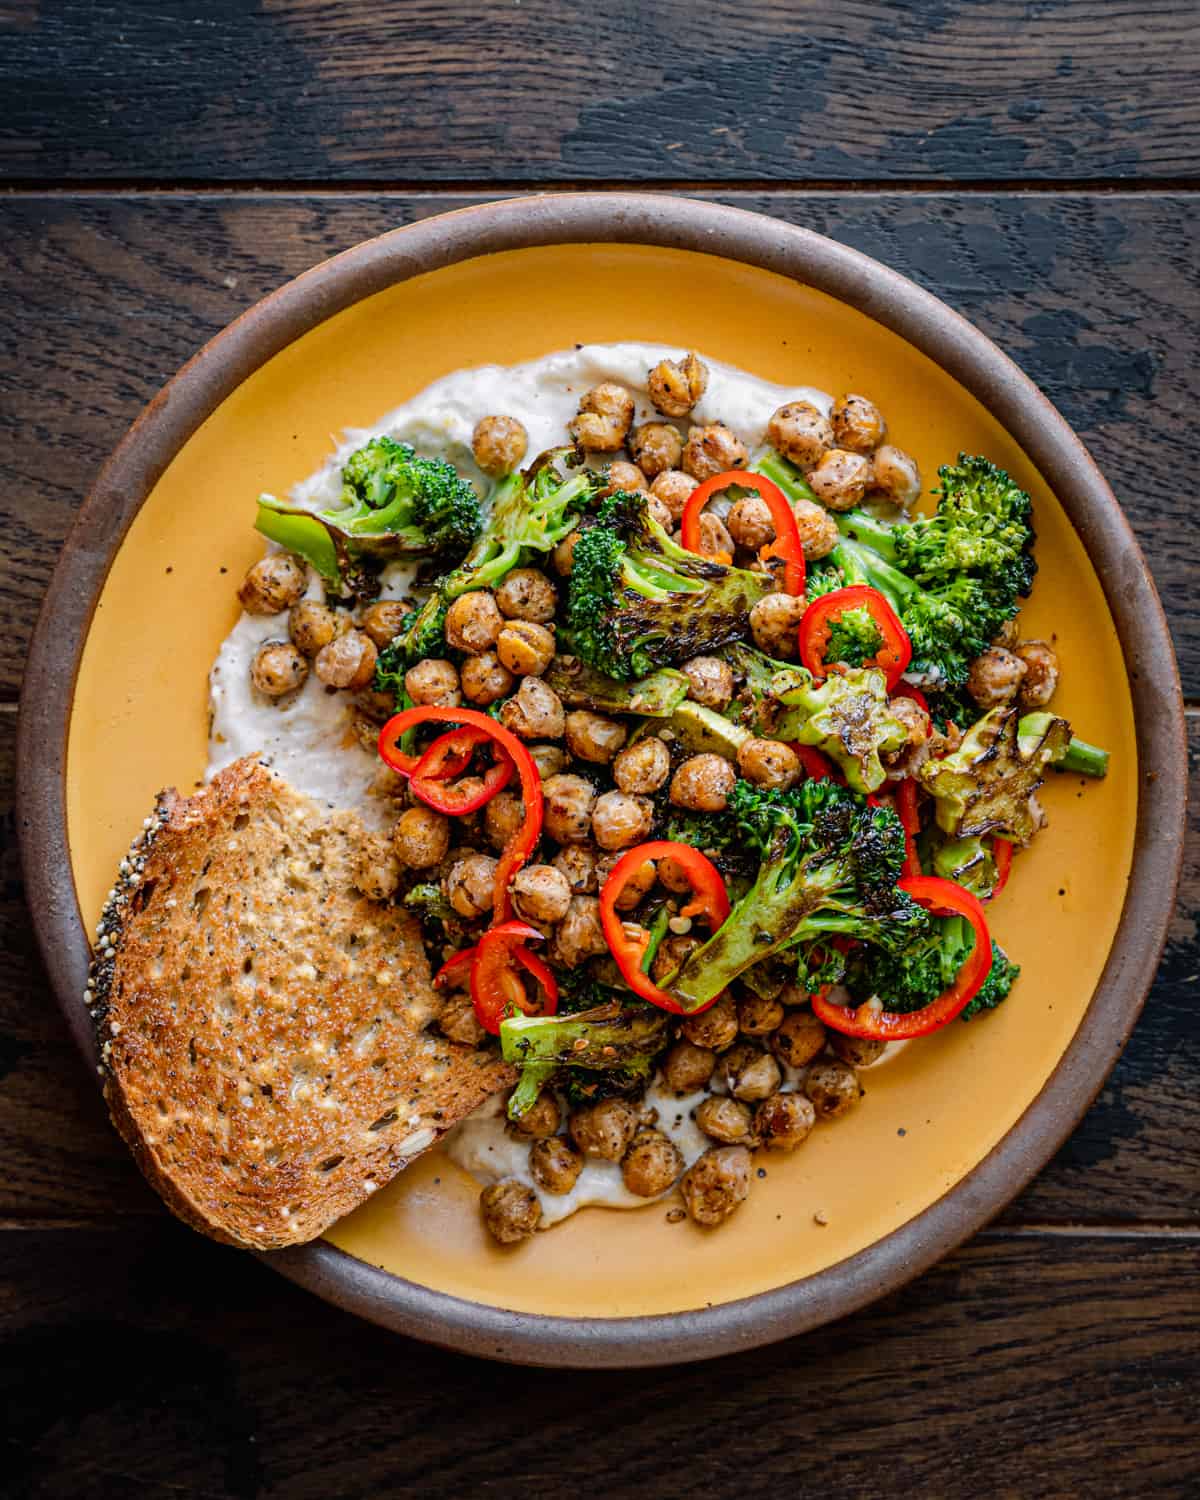 Spiced chickpeas and charred broccoli on yogurt sauce with bread on a yellow plate on a table.